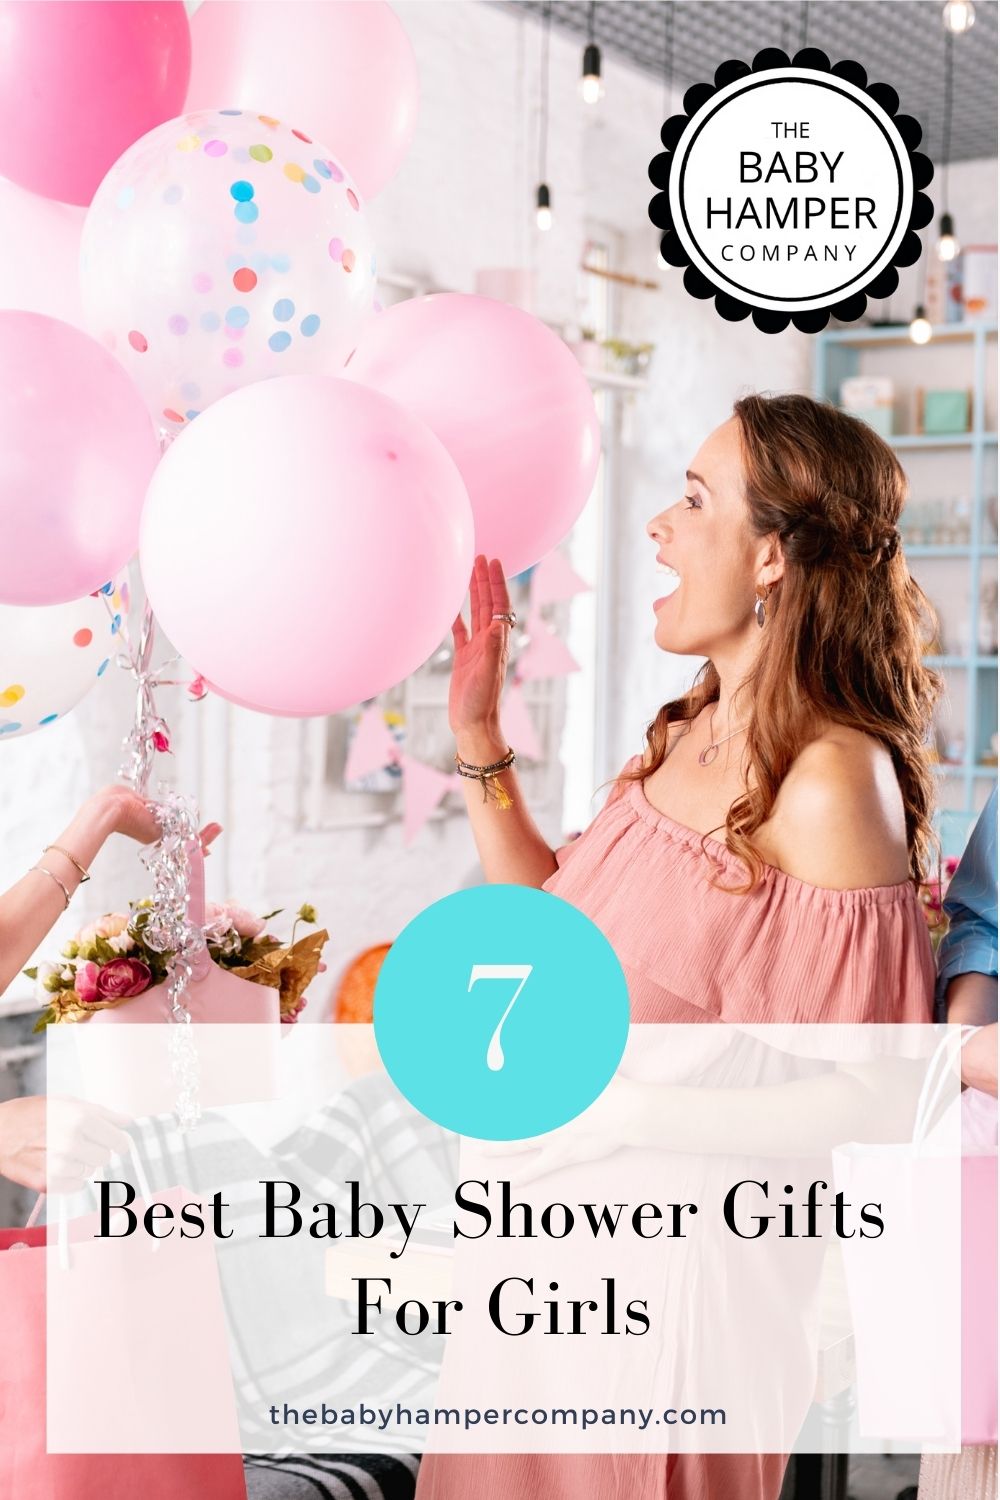 Best Baby Shower Gifts for Girls